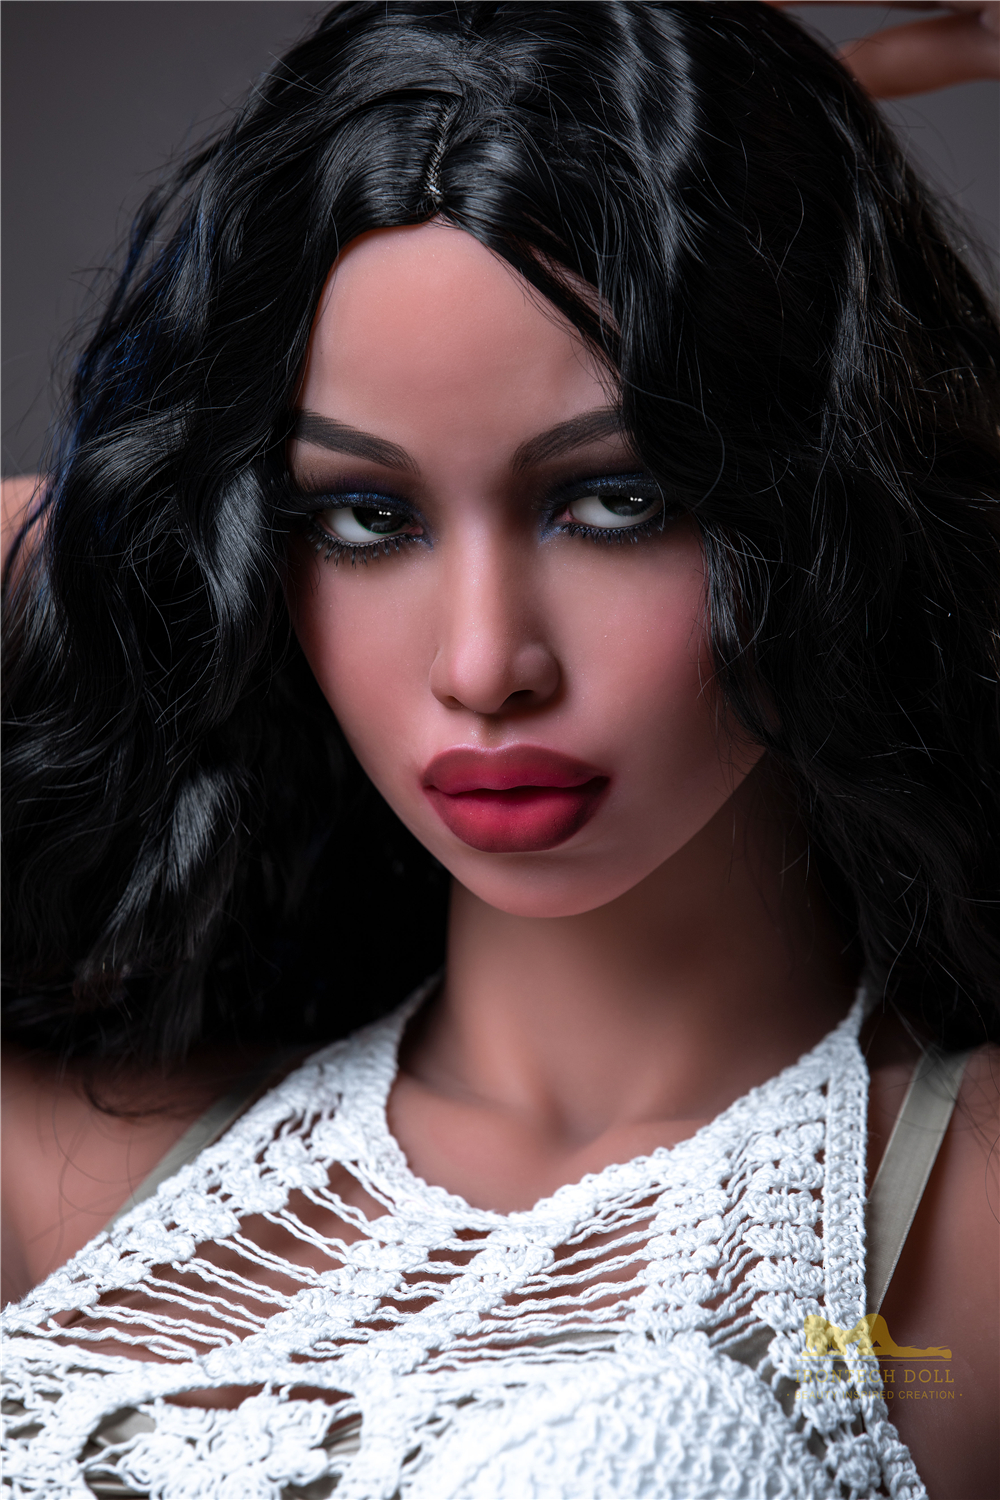 Irontech | Lora 5ft 7 /171cm Beautiful With Black Long Curly Hair Sex Doll